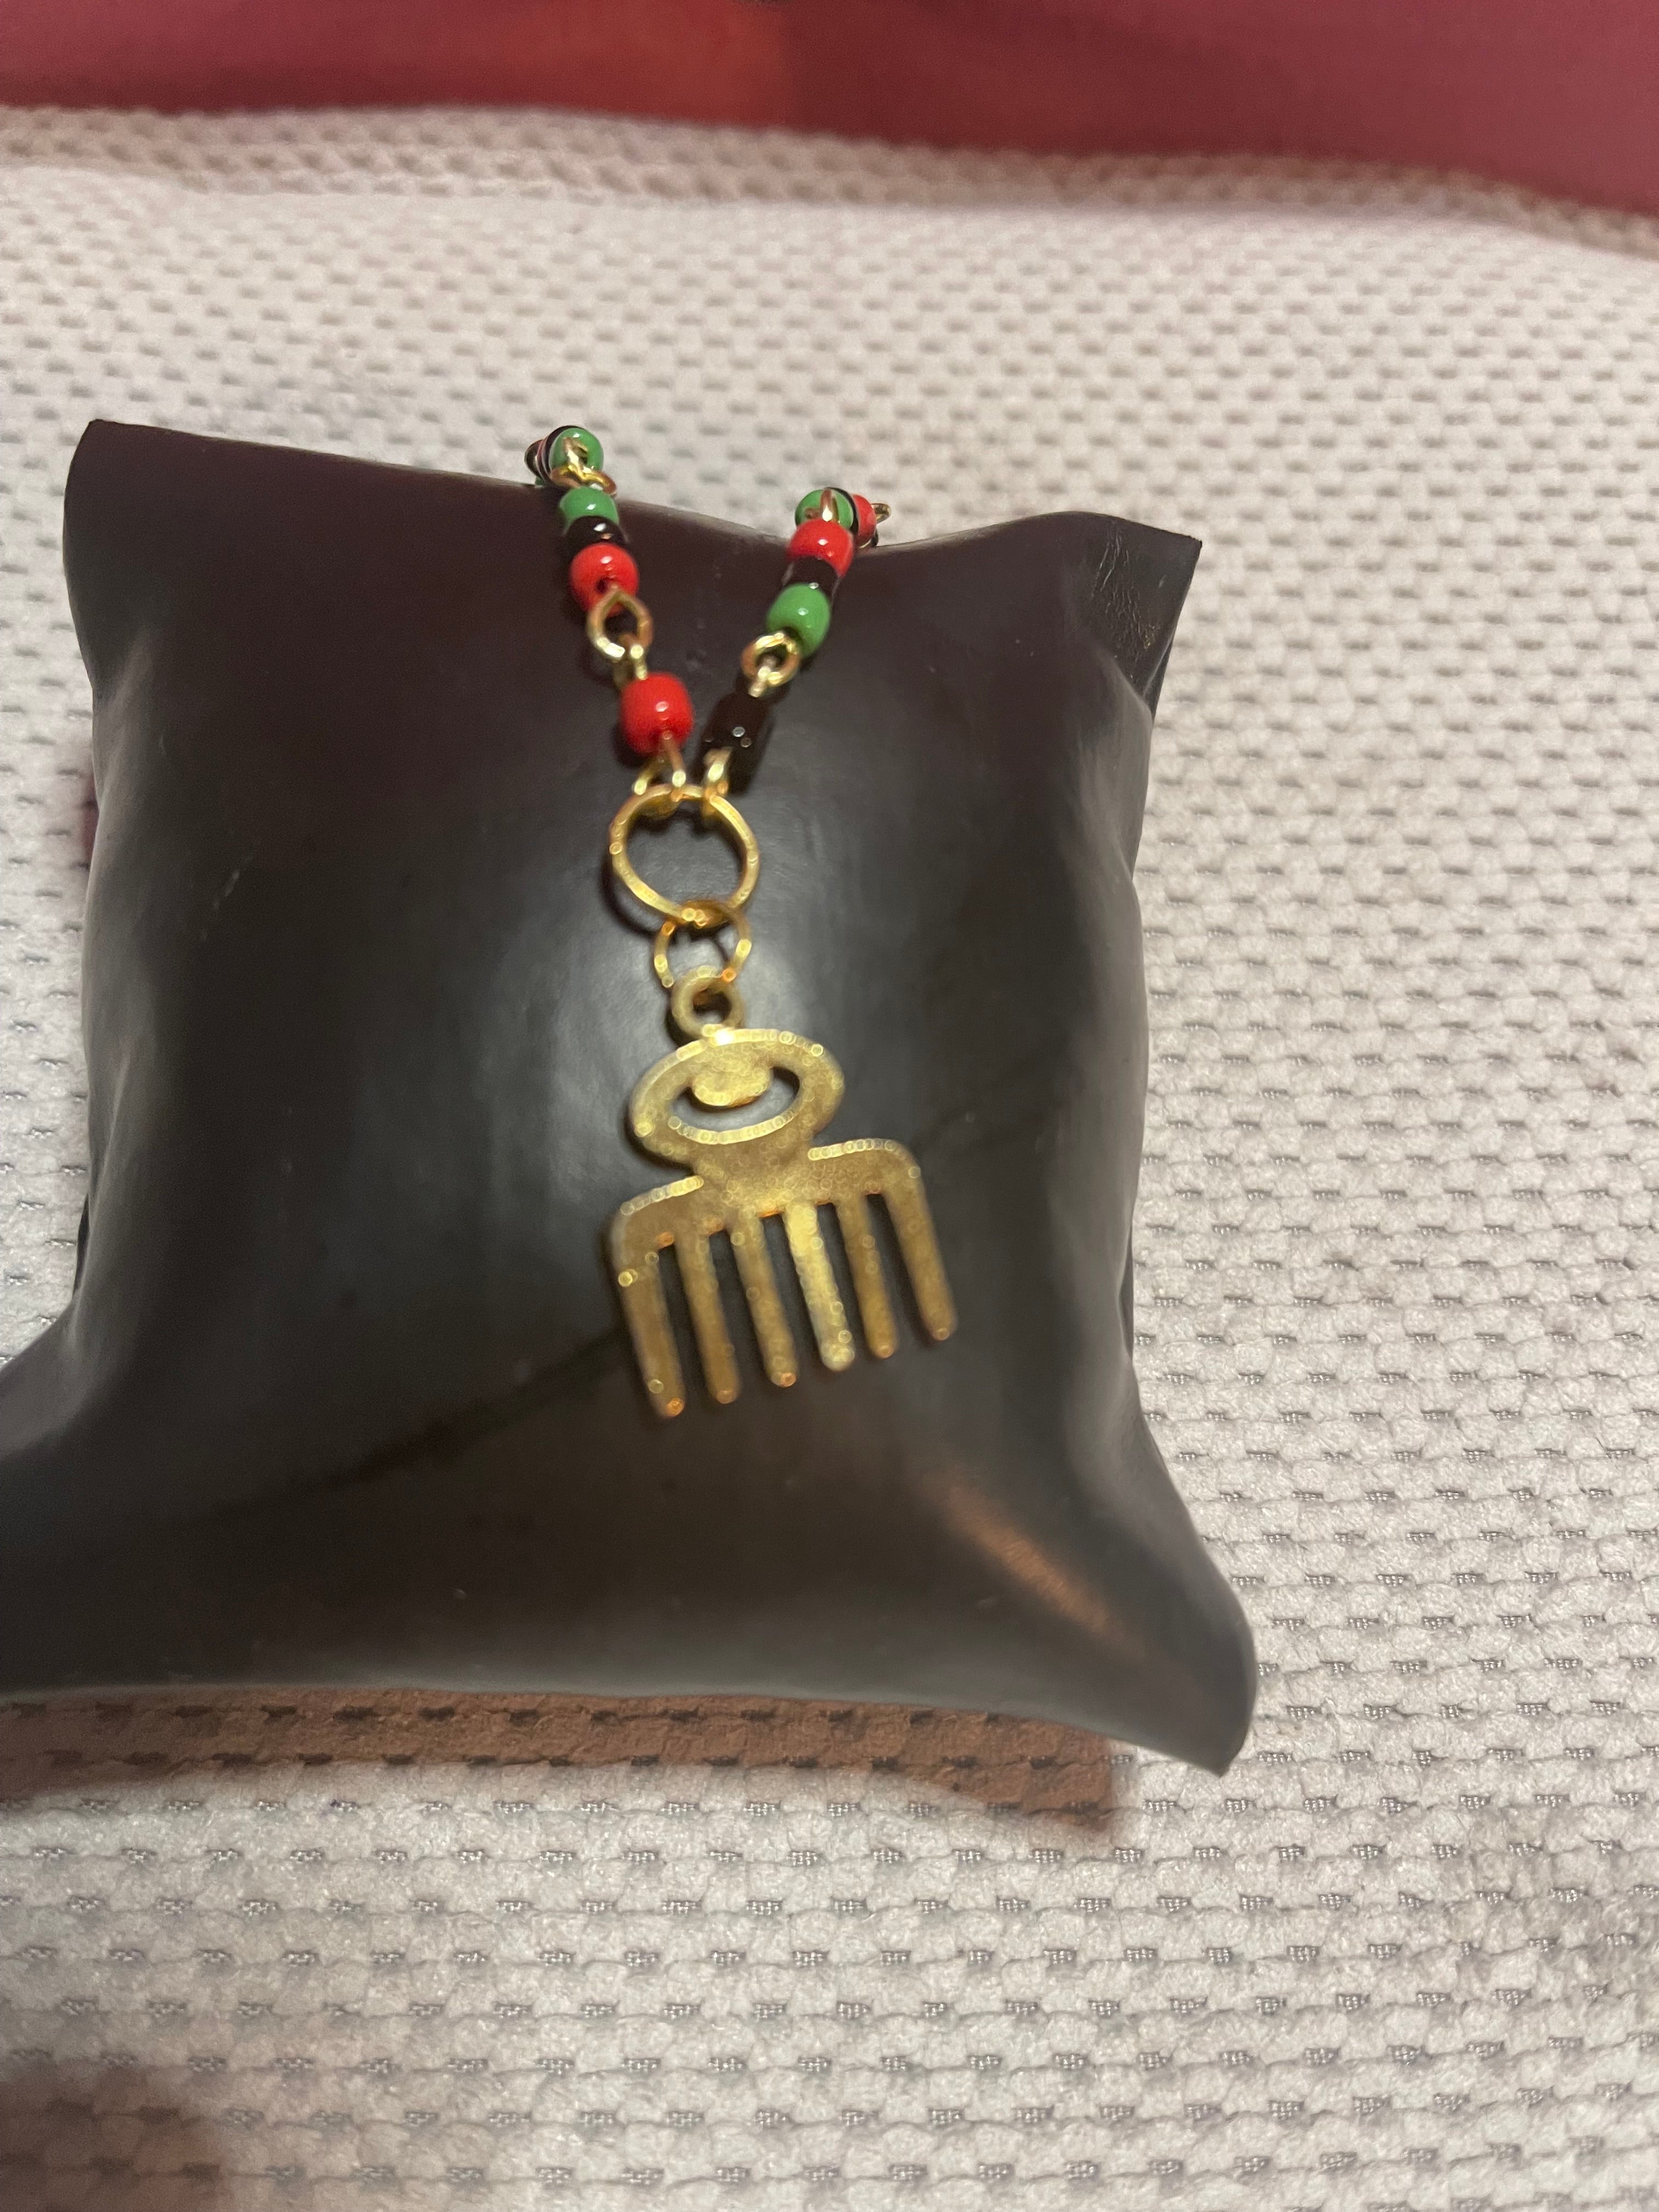 Ankle Bracelet (red, black, green) w/charms